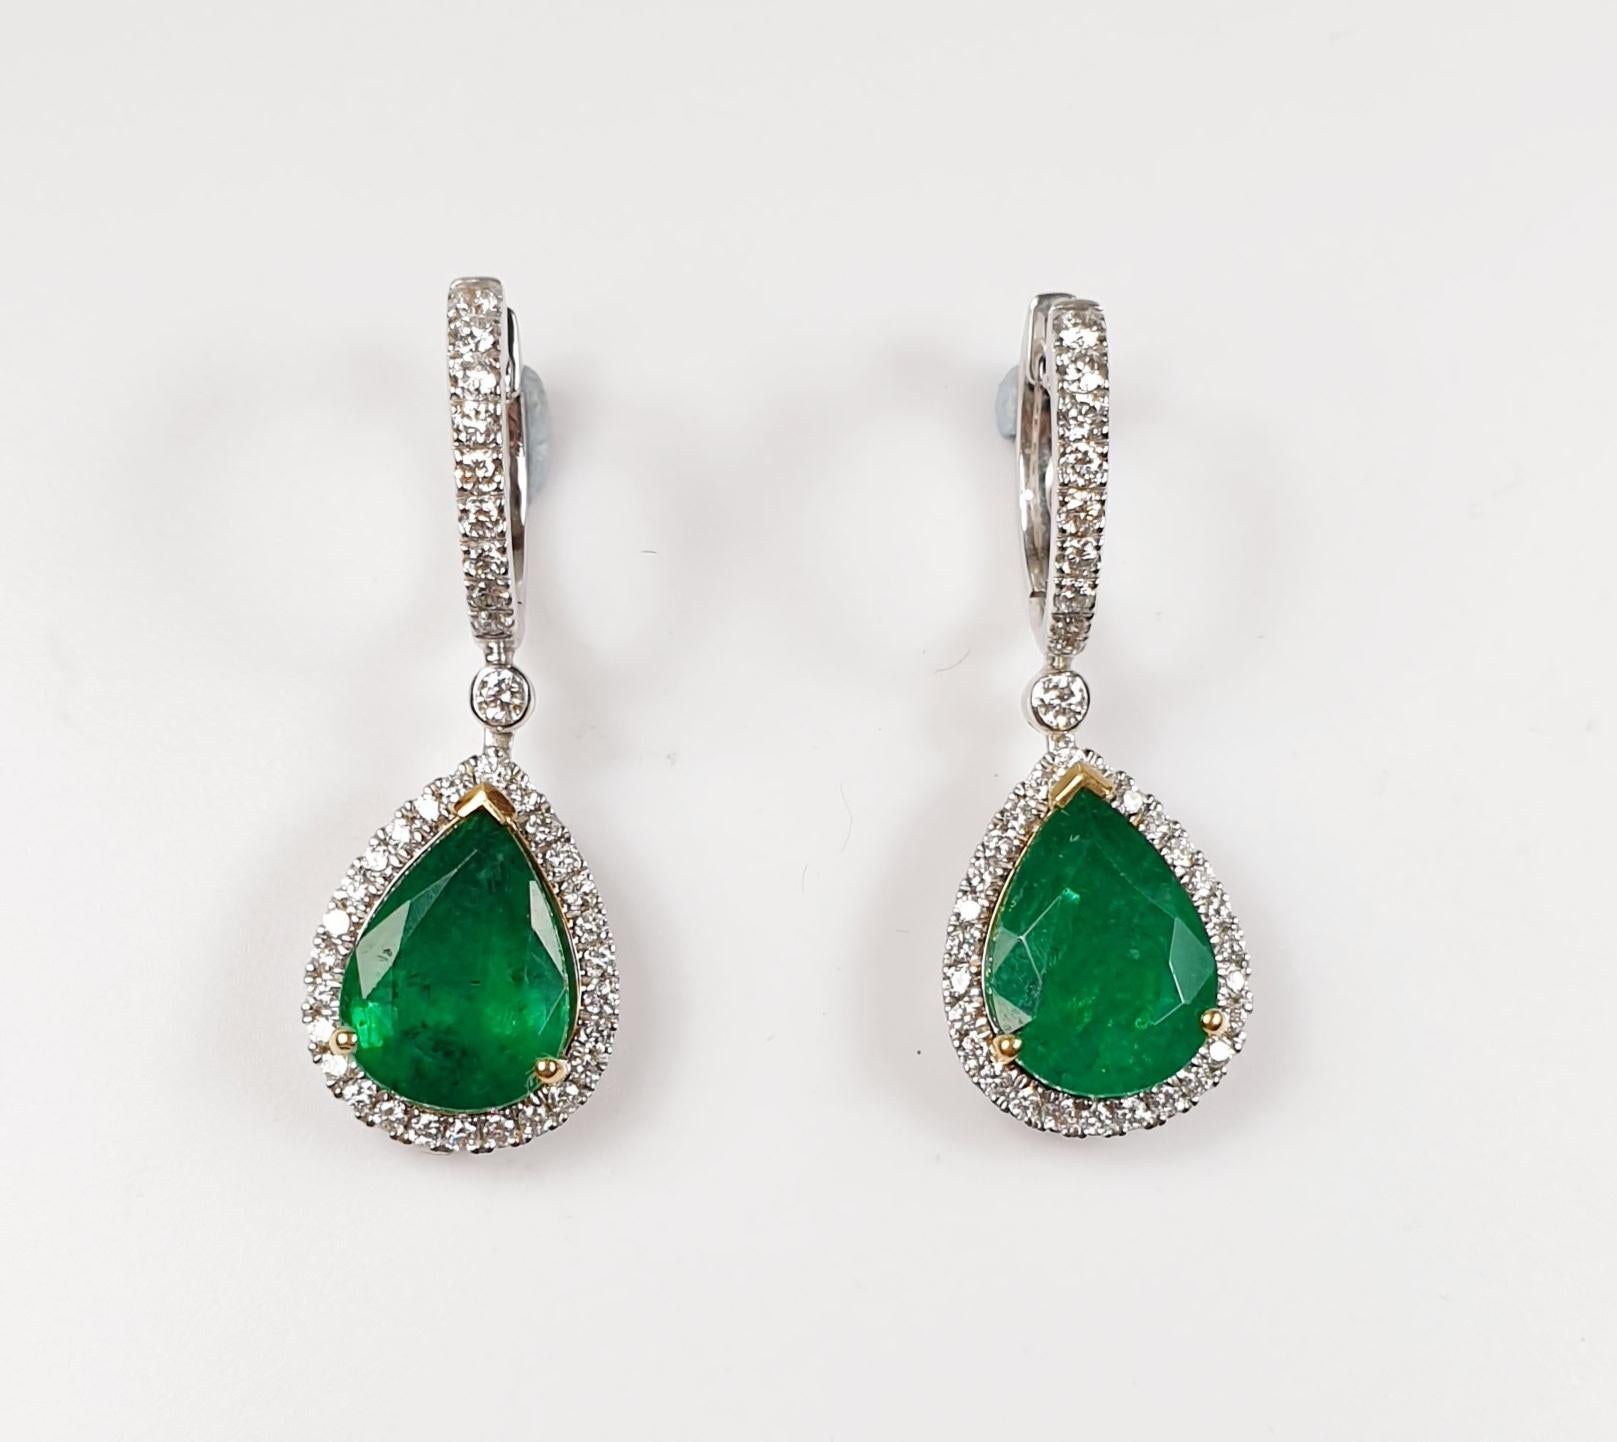 Pear Shape Colombian Emerald 6.60ct total  hoop Earrings with Diamonds earrings  and White Gold

Irama Pradera is a Young designer from Spain that searches always for the best gems and combines classic with contemporary mounting and styles.
She